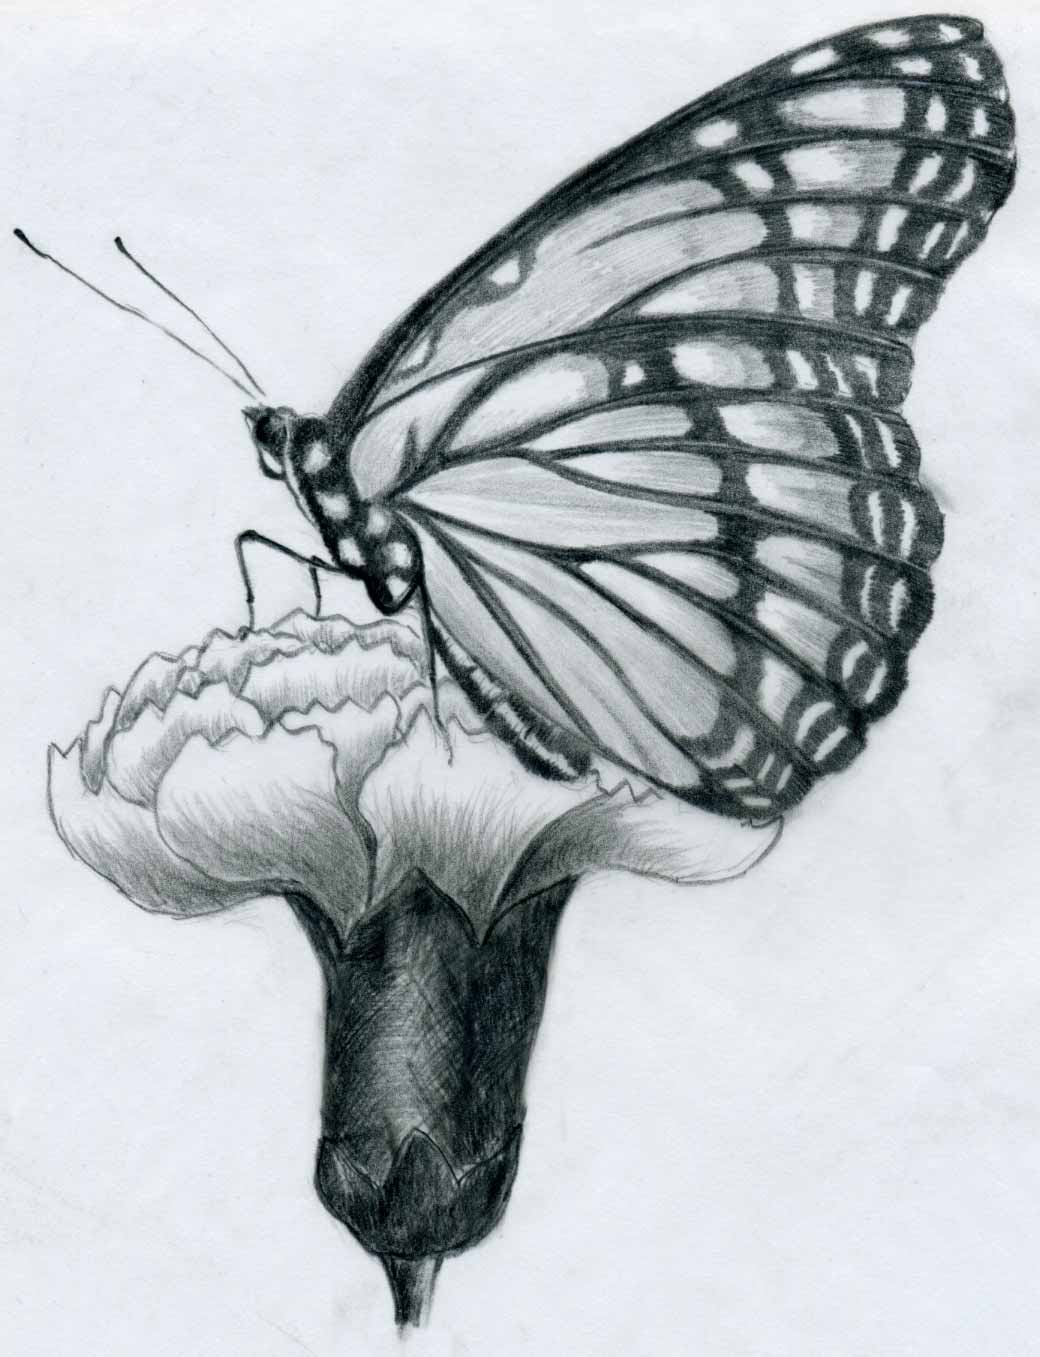 Free Butterfly Drawings, Download Free Butterfly Drawings png image, Free ClipArts on Clipart Library